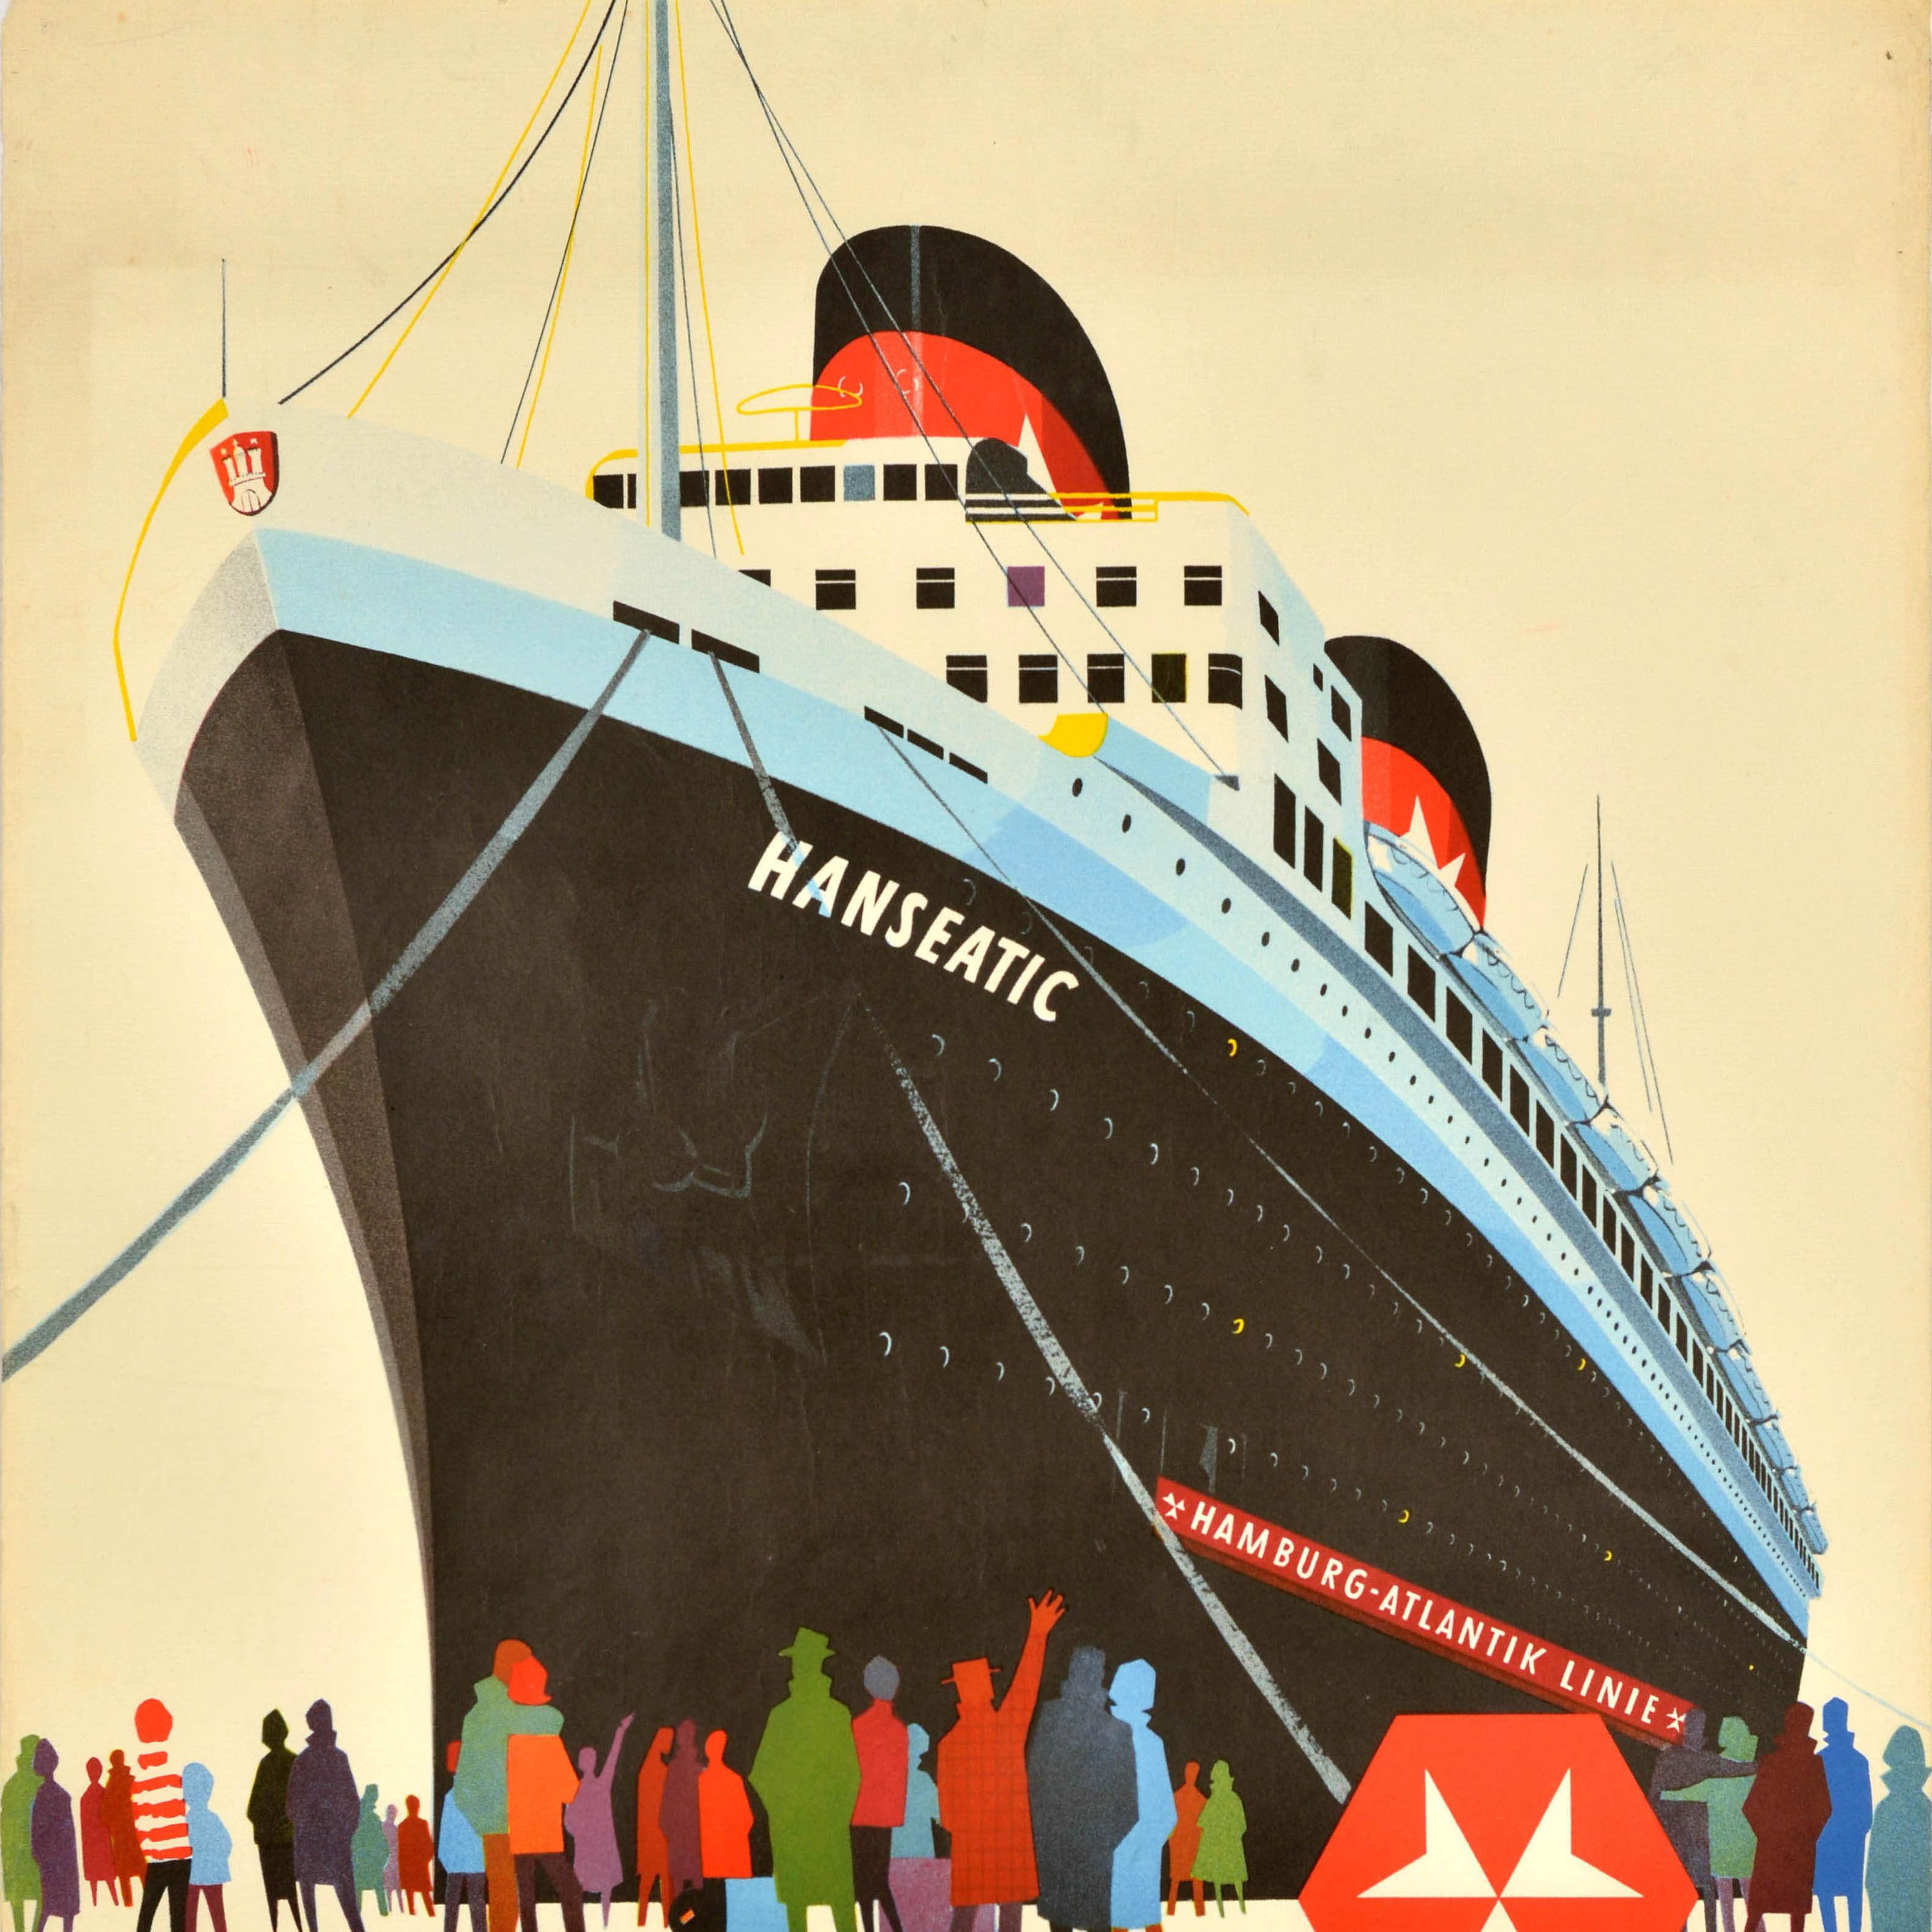 Original vintage cruise travel advertising poster for Hamburg Atlantic Line / Hamburg Atlantik Linie featuring an illustration of people as colourful silhouettes waving to and looking up at a ship named Hanseatic with the text in German below - das